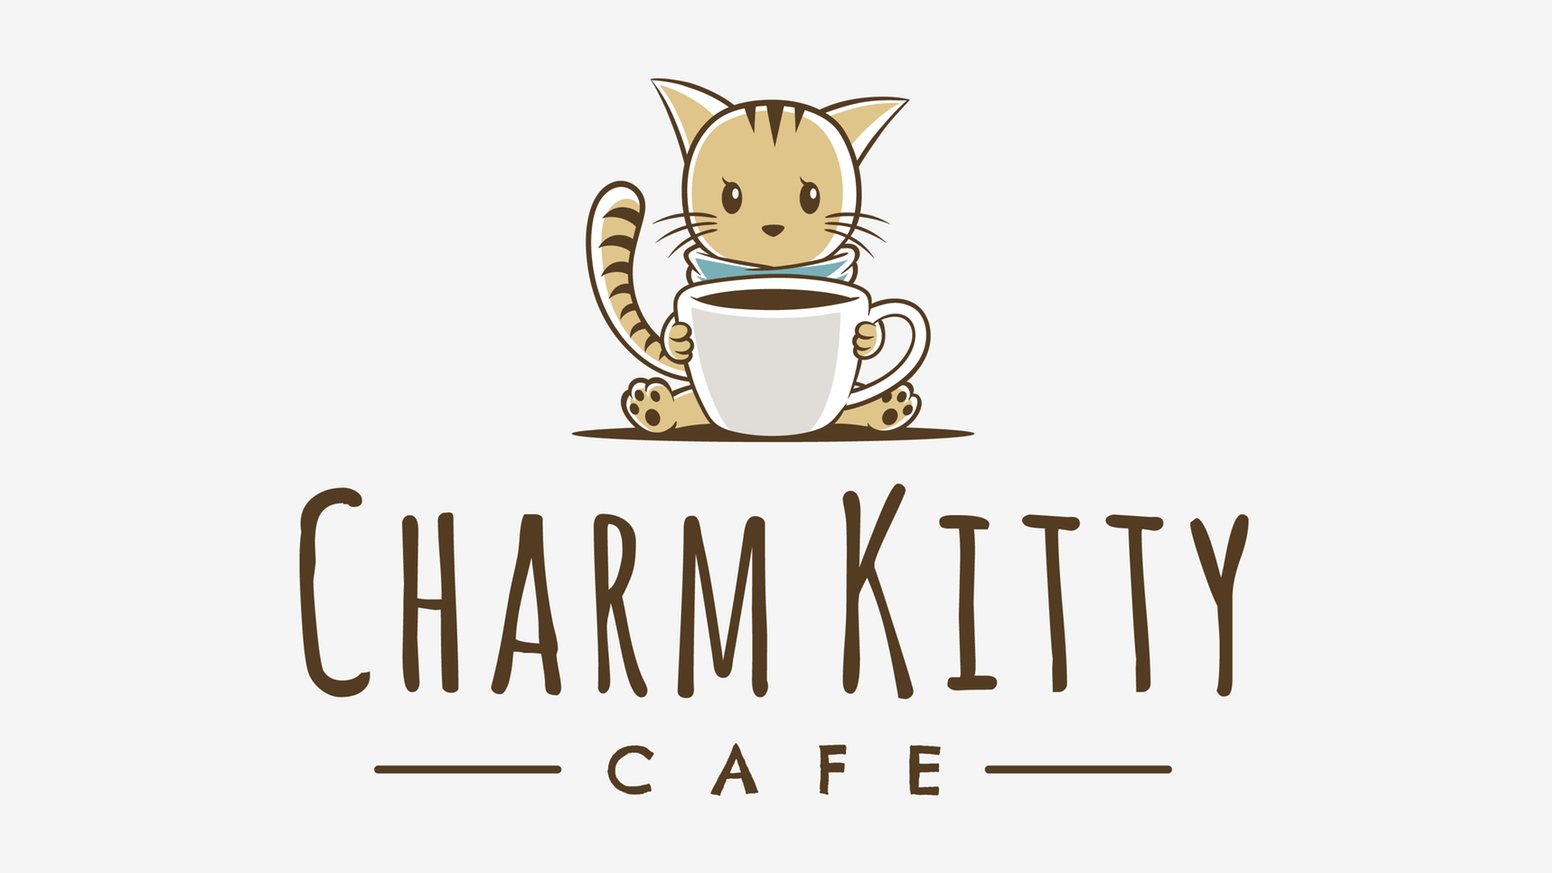 Famous Cat Logo - Charm Kitty Cafe: Baltimore's Cat Cafe by Cam Tucker Famous Cat